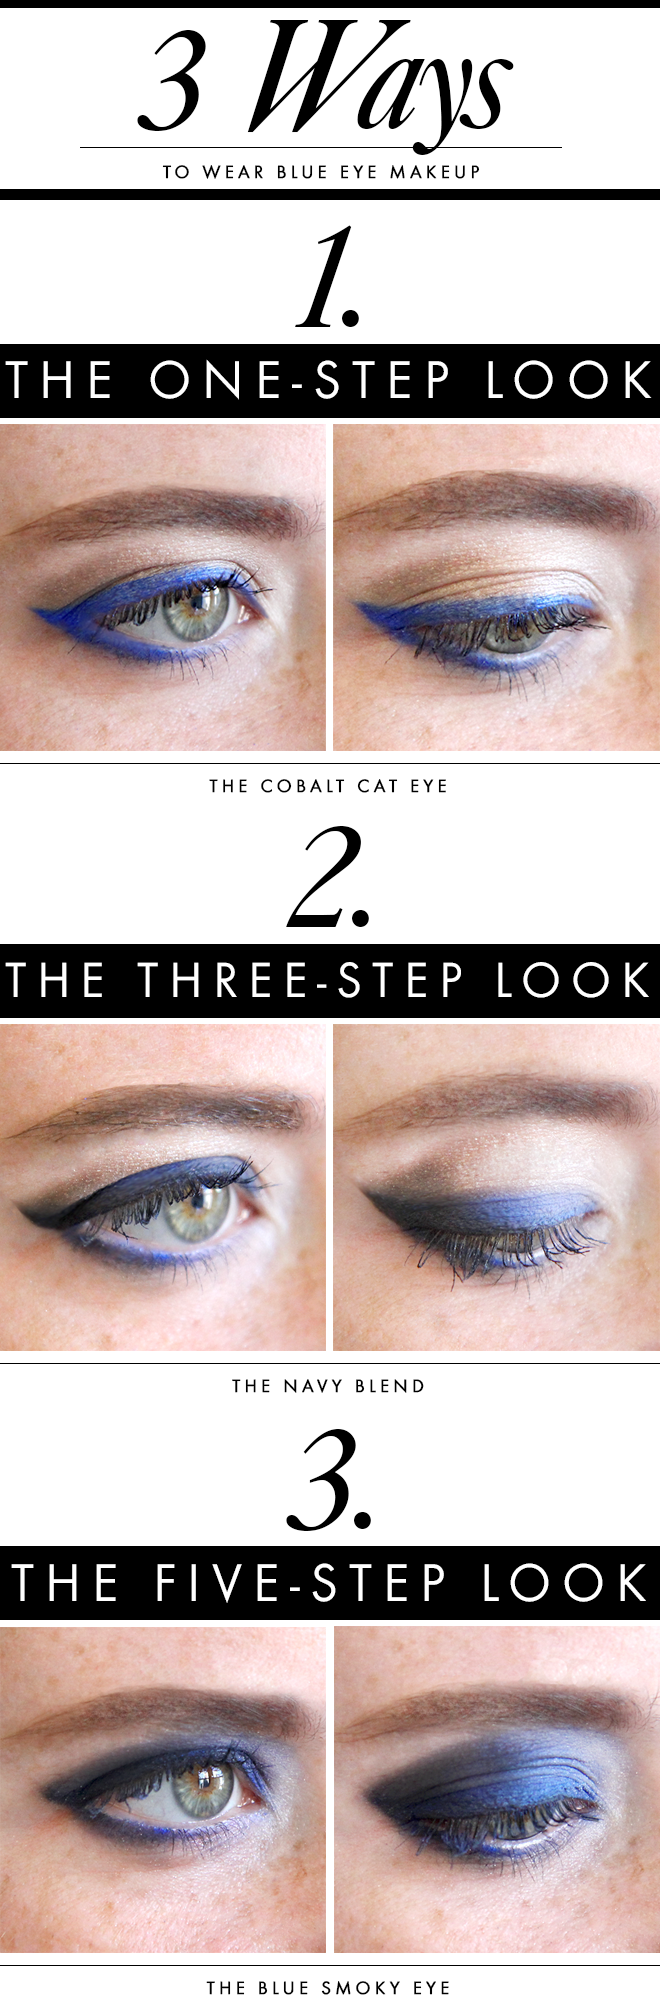 3 Non-Intimidating Ways to Wear Blue Eye Makeup | StyleCaster